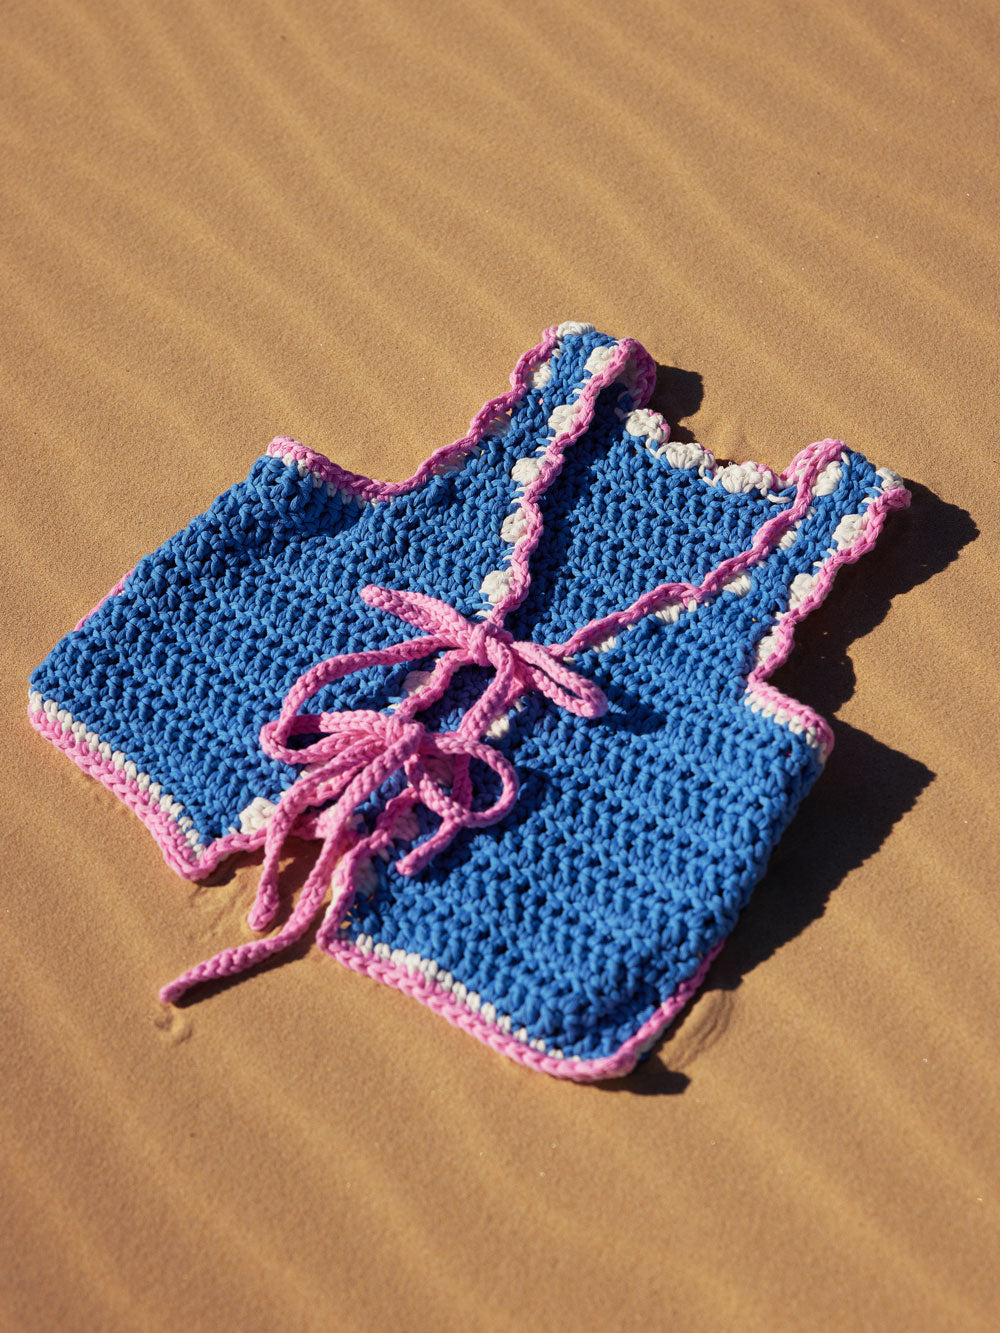 Crochet Kits  Learn to Crochet with a Crochet Kit from Cardigang Australia